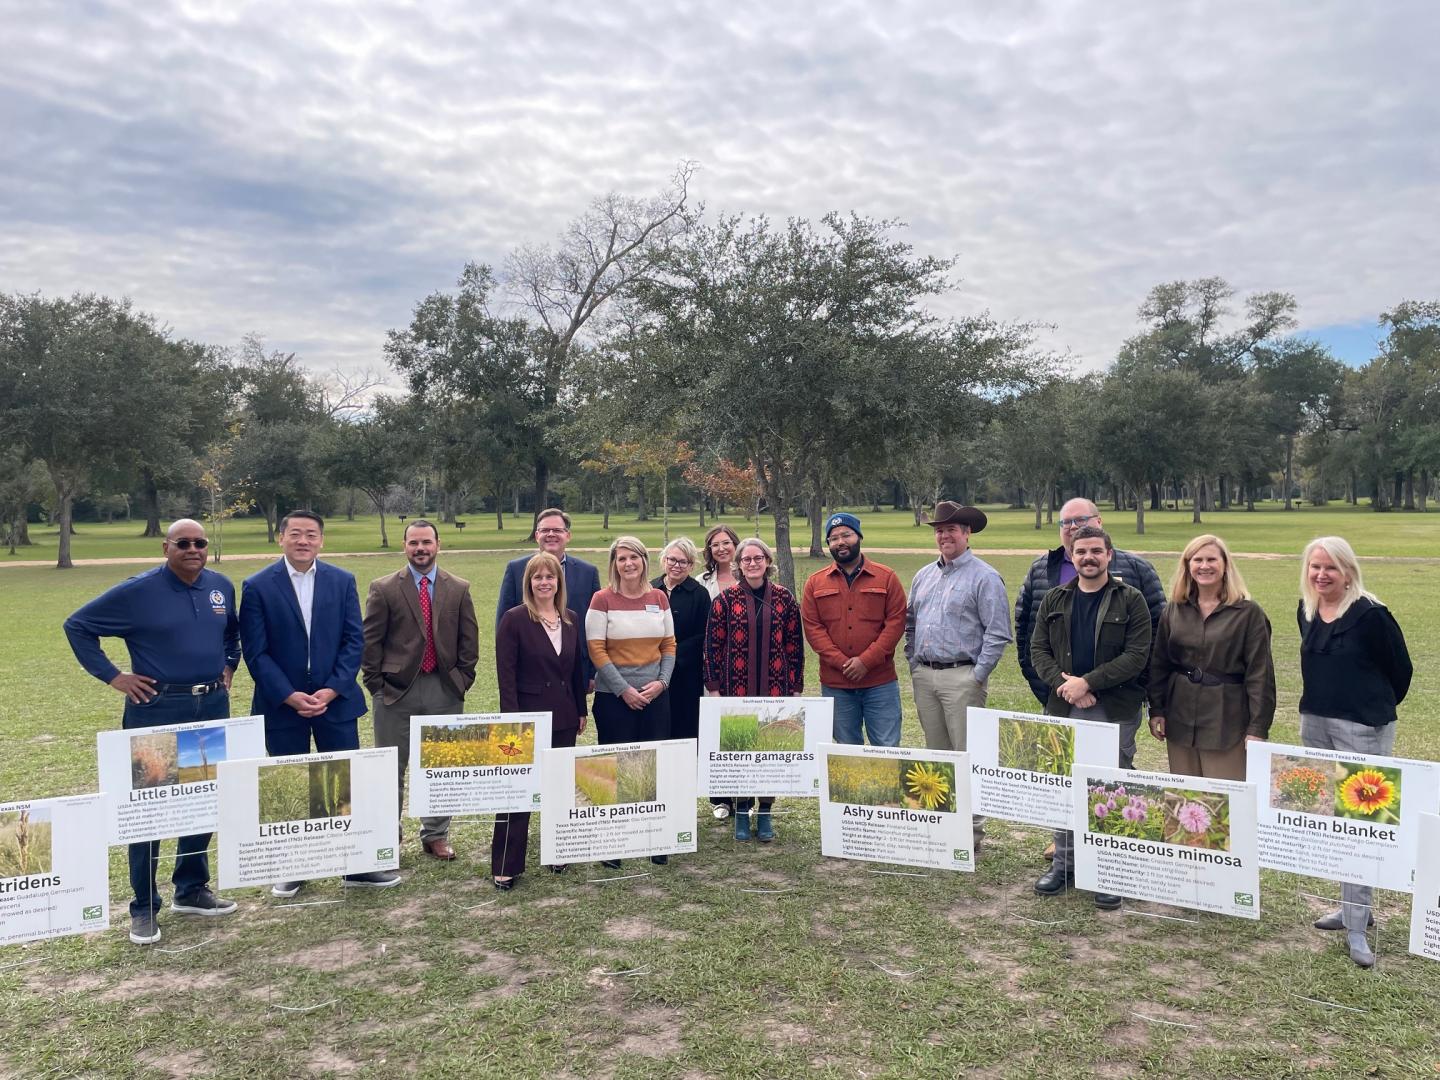 This is an image of the Regional Access To Native Seed Mix coalition standing with posters for the plant releases that were accepted for use in the Harris County Flood Control District plantings.